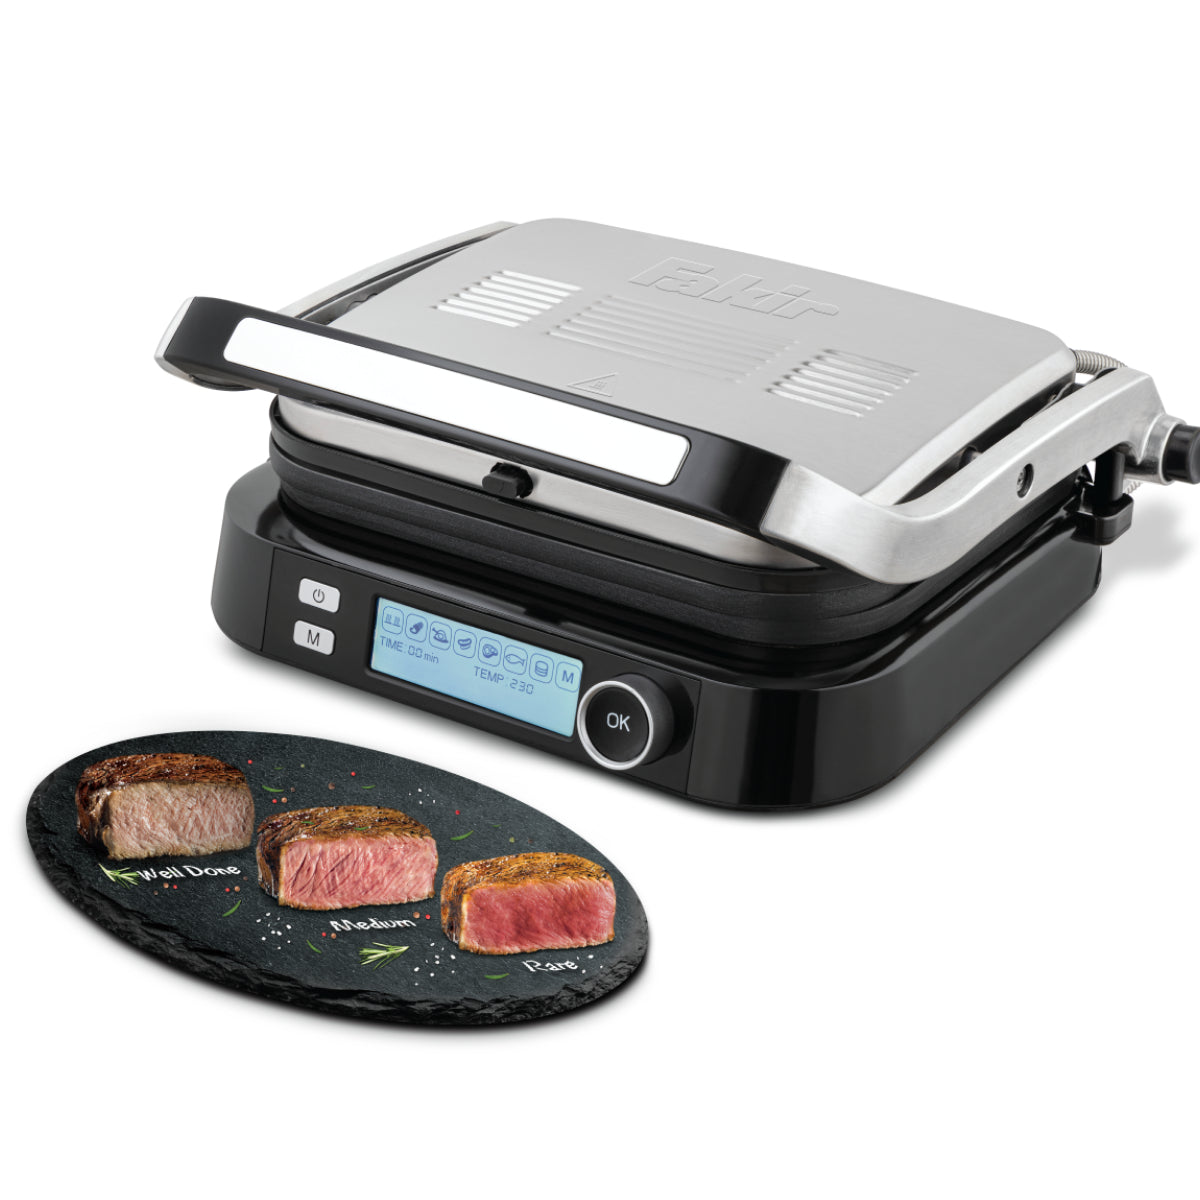 Fakir Grill Expert Smart Grill And Toaster,2100W